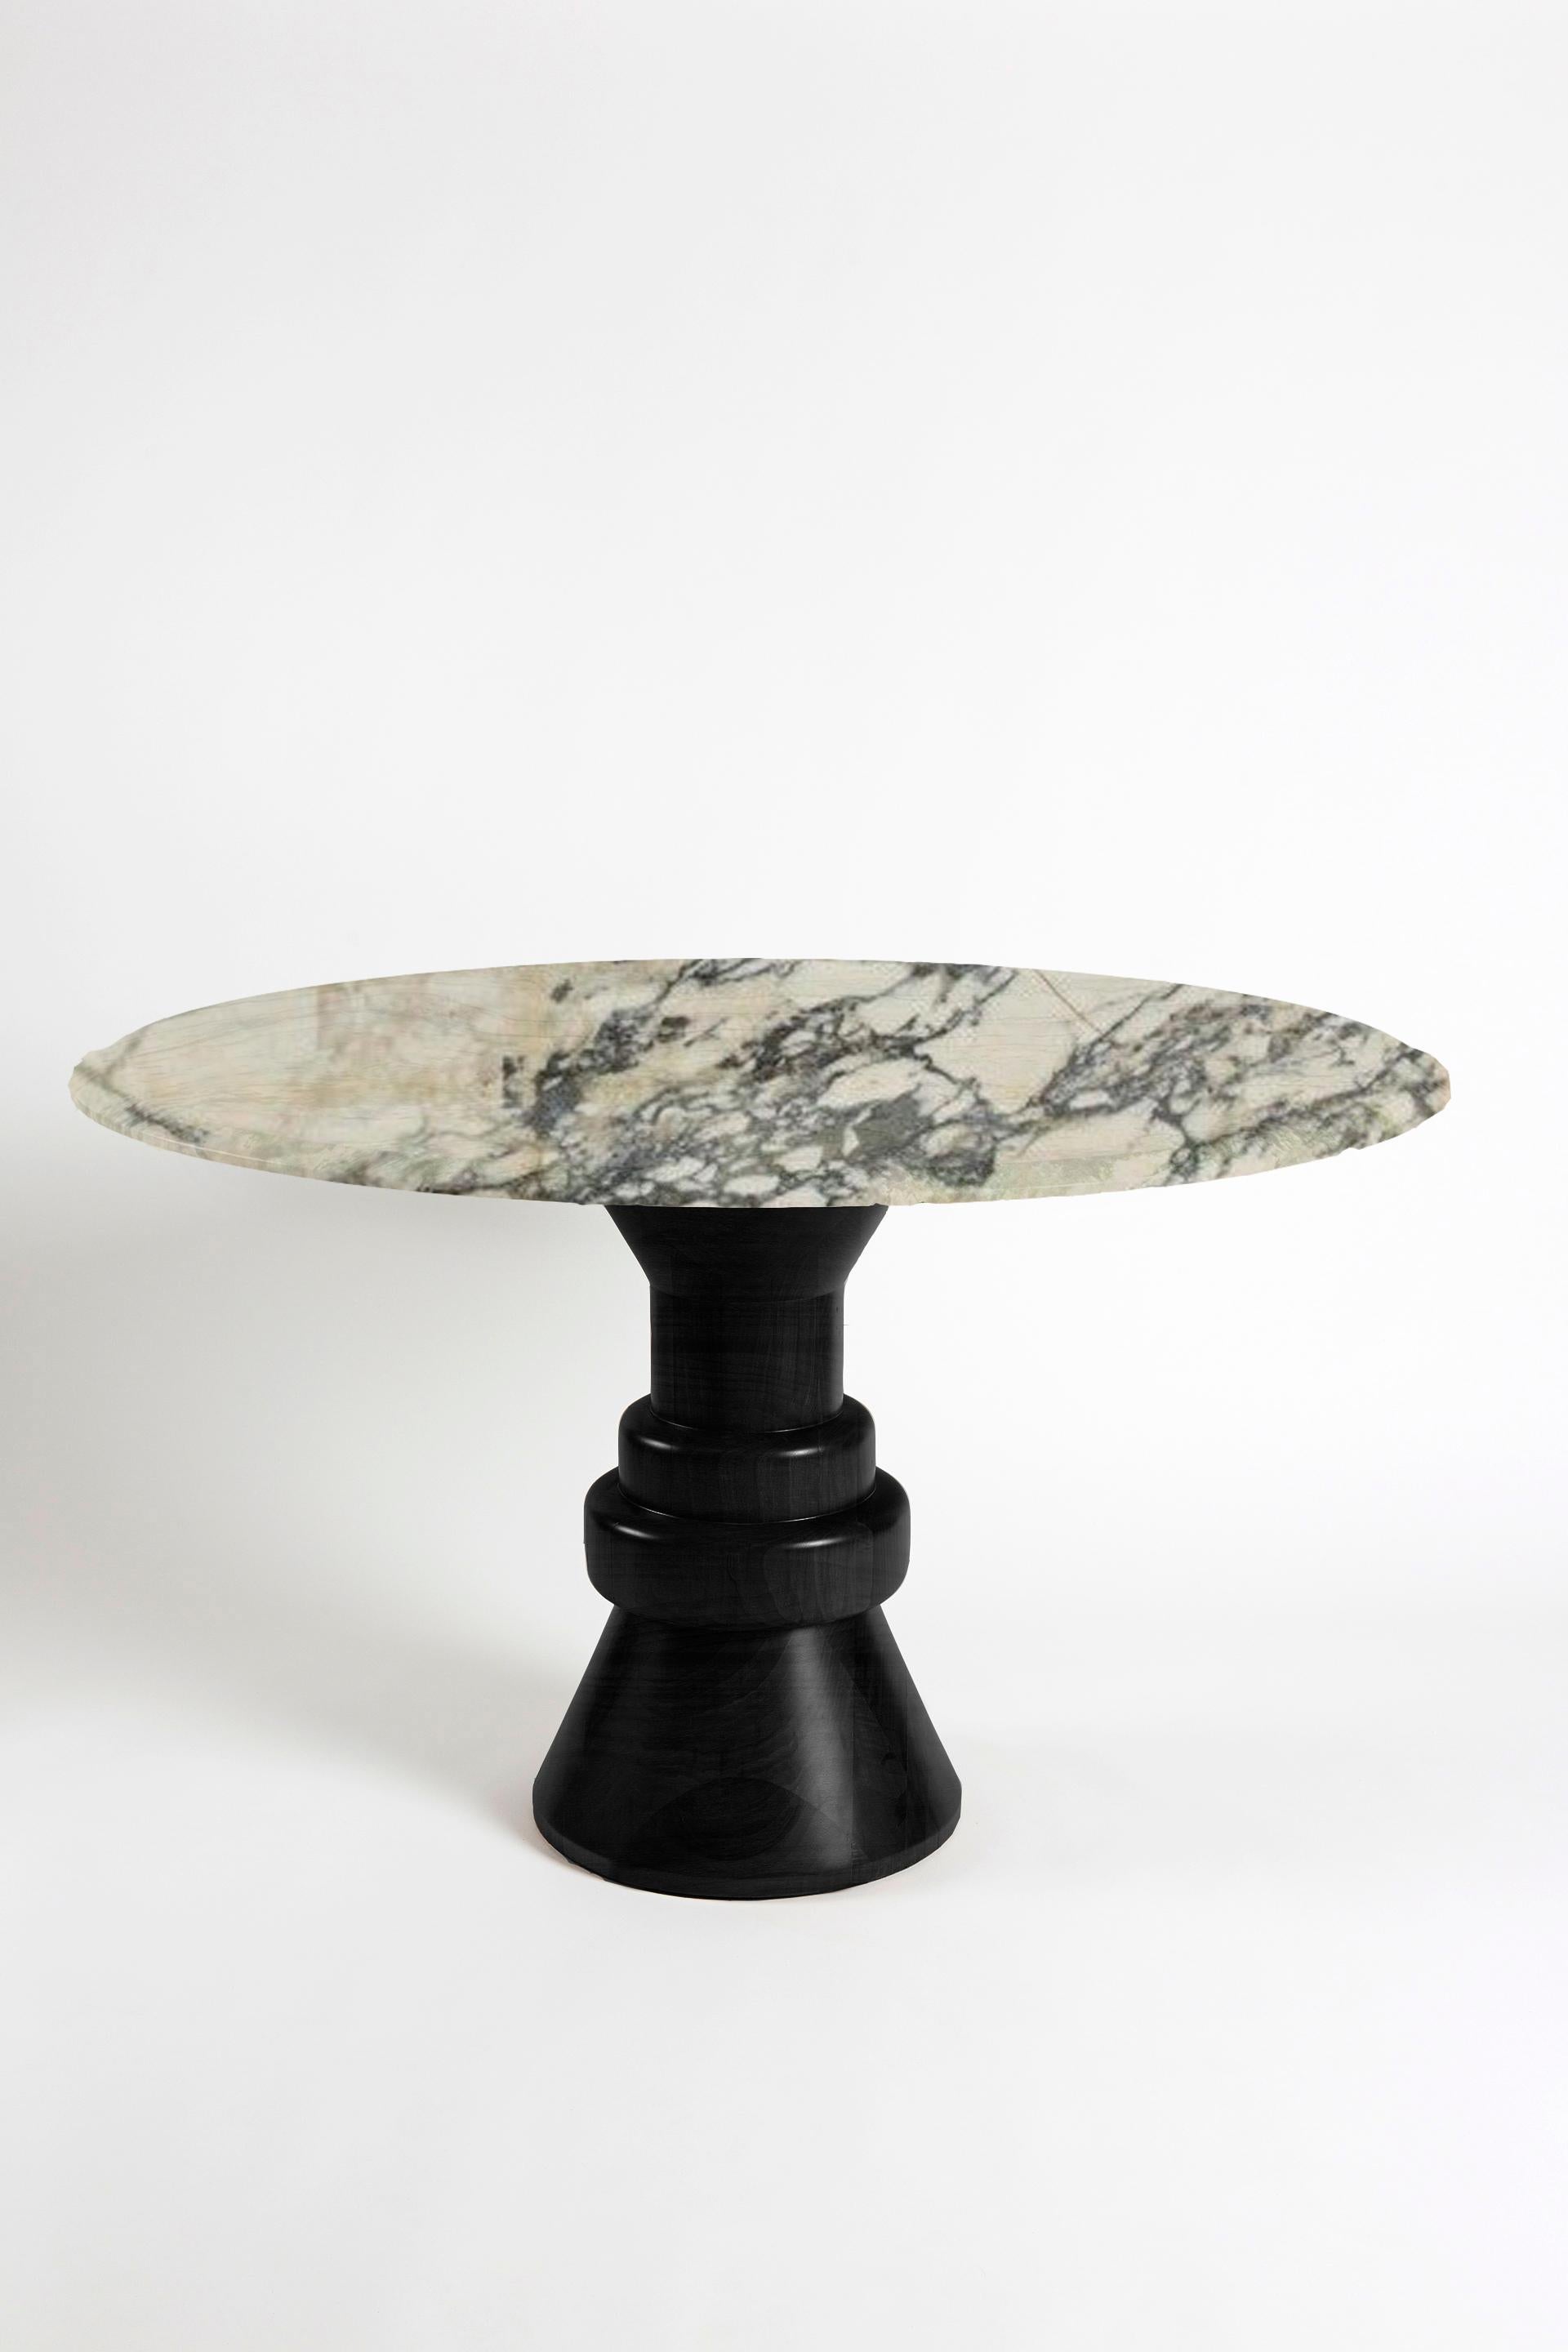 21st Century Gray Marble Round Dining Table with Sculptural Black Wooden Base For Sale 1